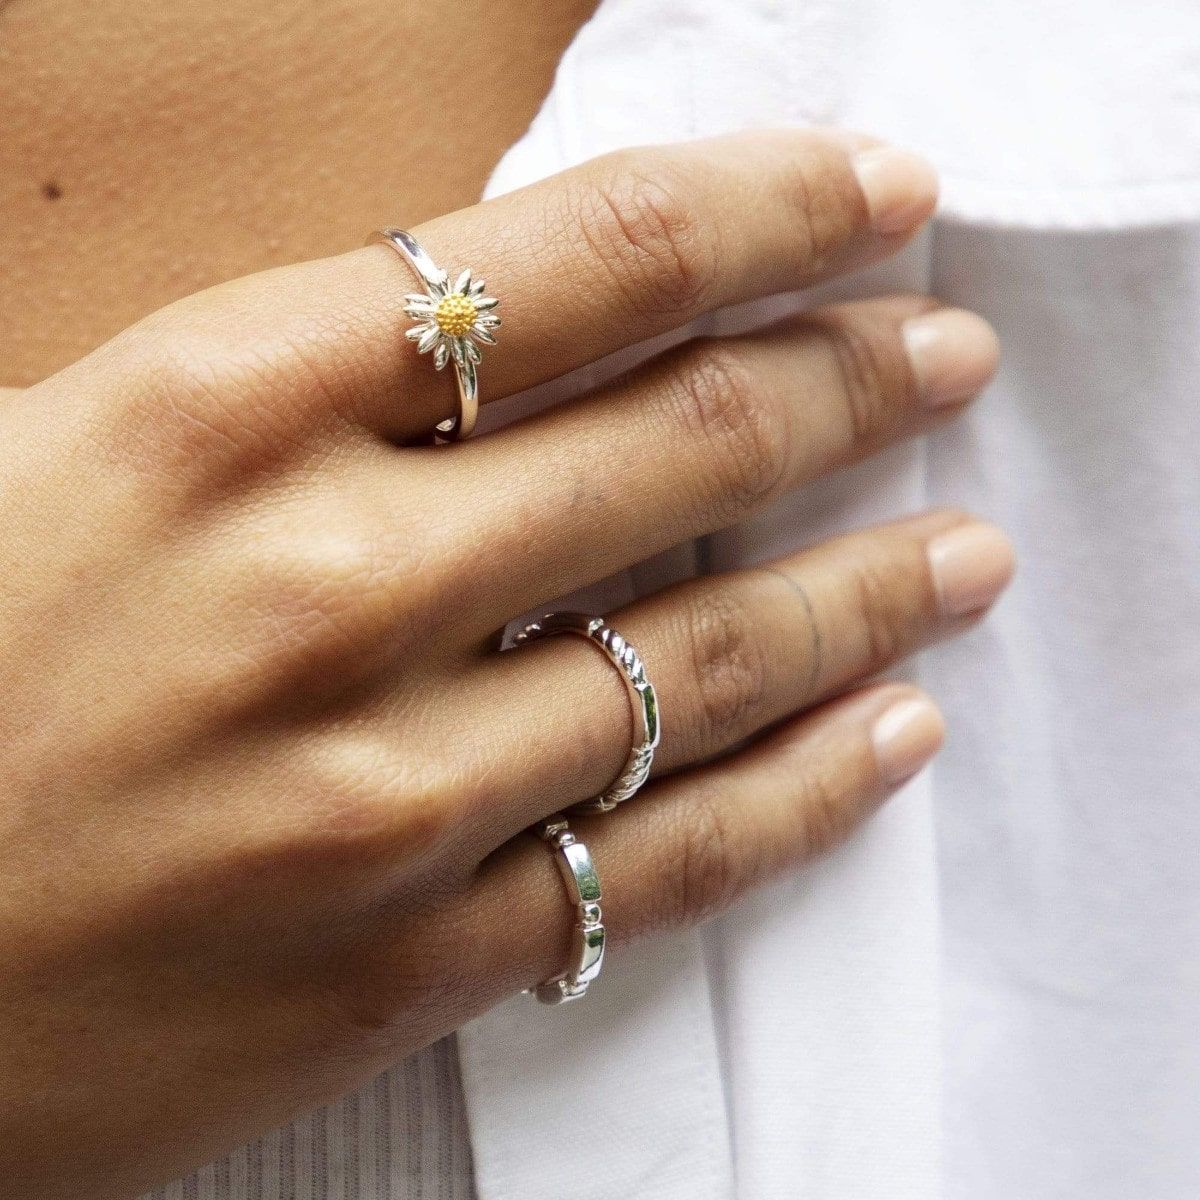 Woman's hand wearing daisy ring